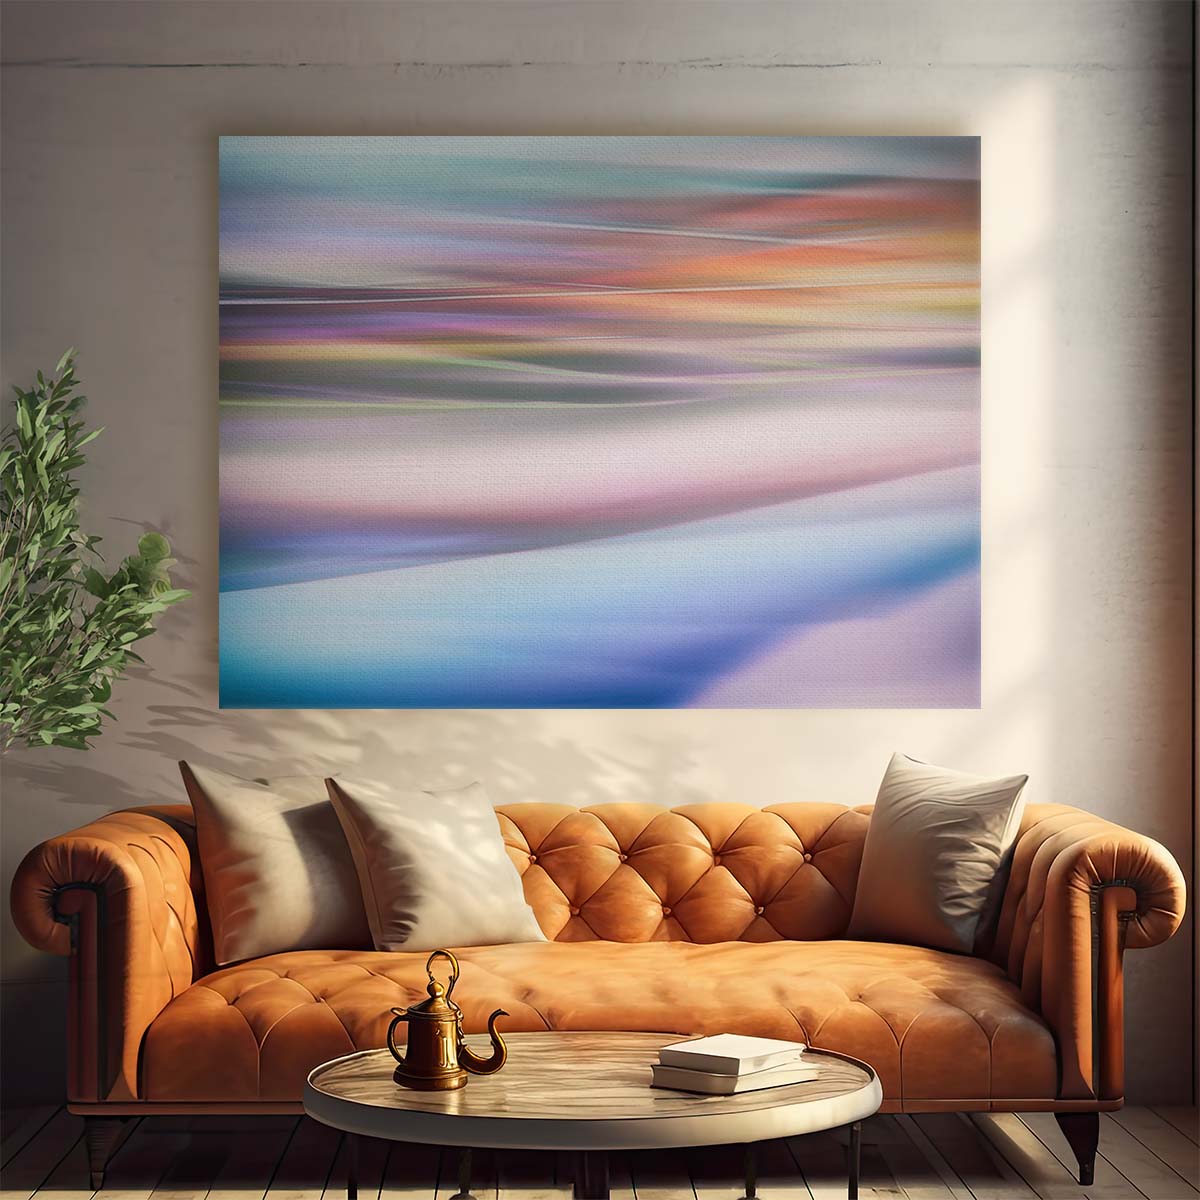 Colorful Pastel Seascape & Sunset Abstract Wall Art by Luxuriance Designs. Made in USA.